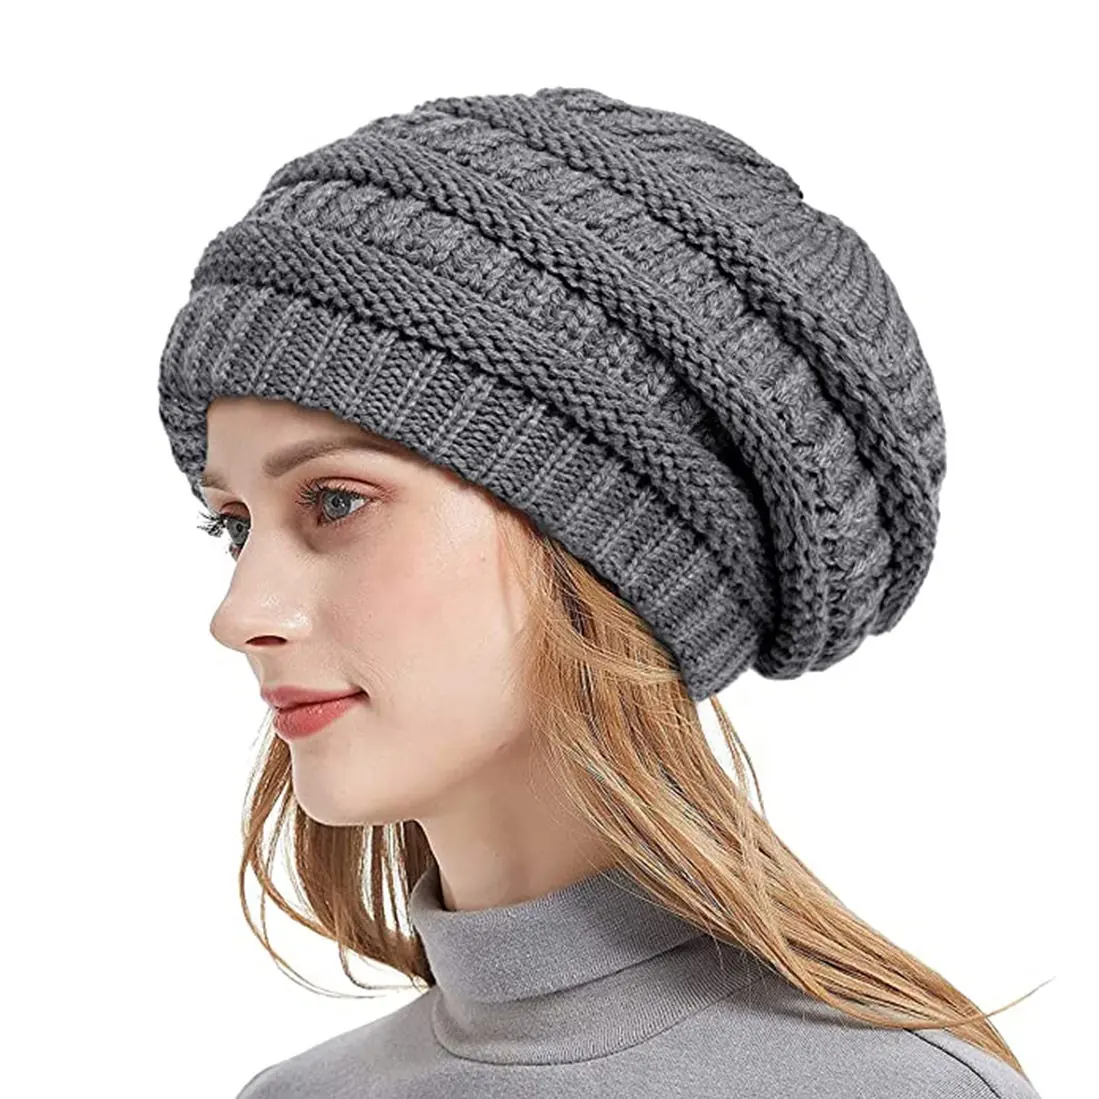 Winter Slouchy Beanies for Women Oversize Knit Warm Hats Thick for Cold Weather